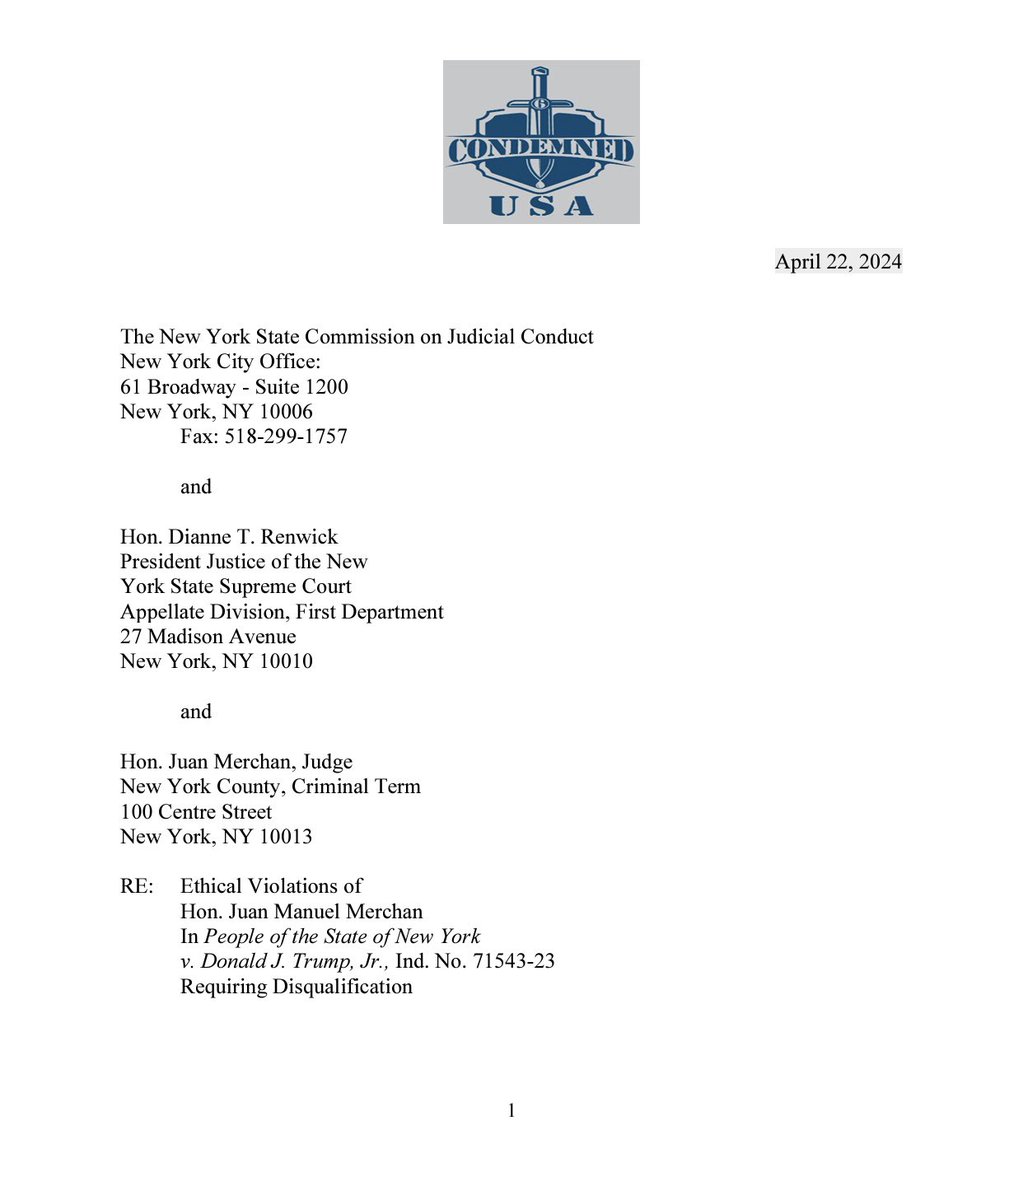 🚨 BREAKING THREAD 🧵 🪡 
Treniss Evans, Condemned USA, Files Ethics Complaint with The New York State Commission on Judicial Conduct, Alleges “Ethical Violations of  Hon. Juan Manuel Merchan In People of the State of New York v. Donald J. Trump, Jr….Requiring Disqualification”